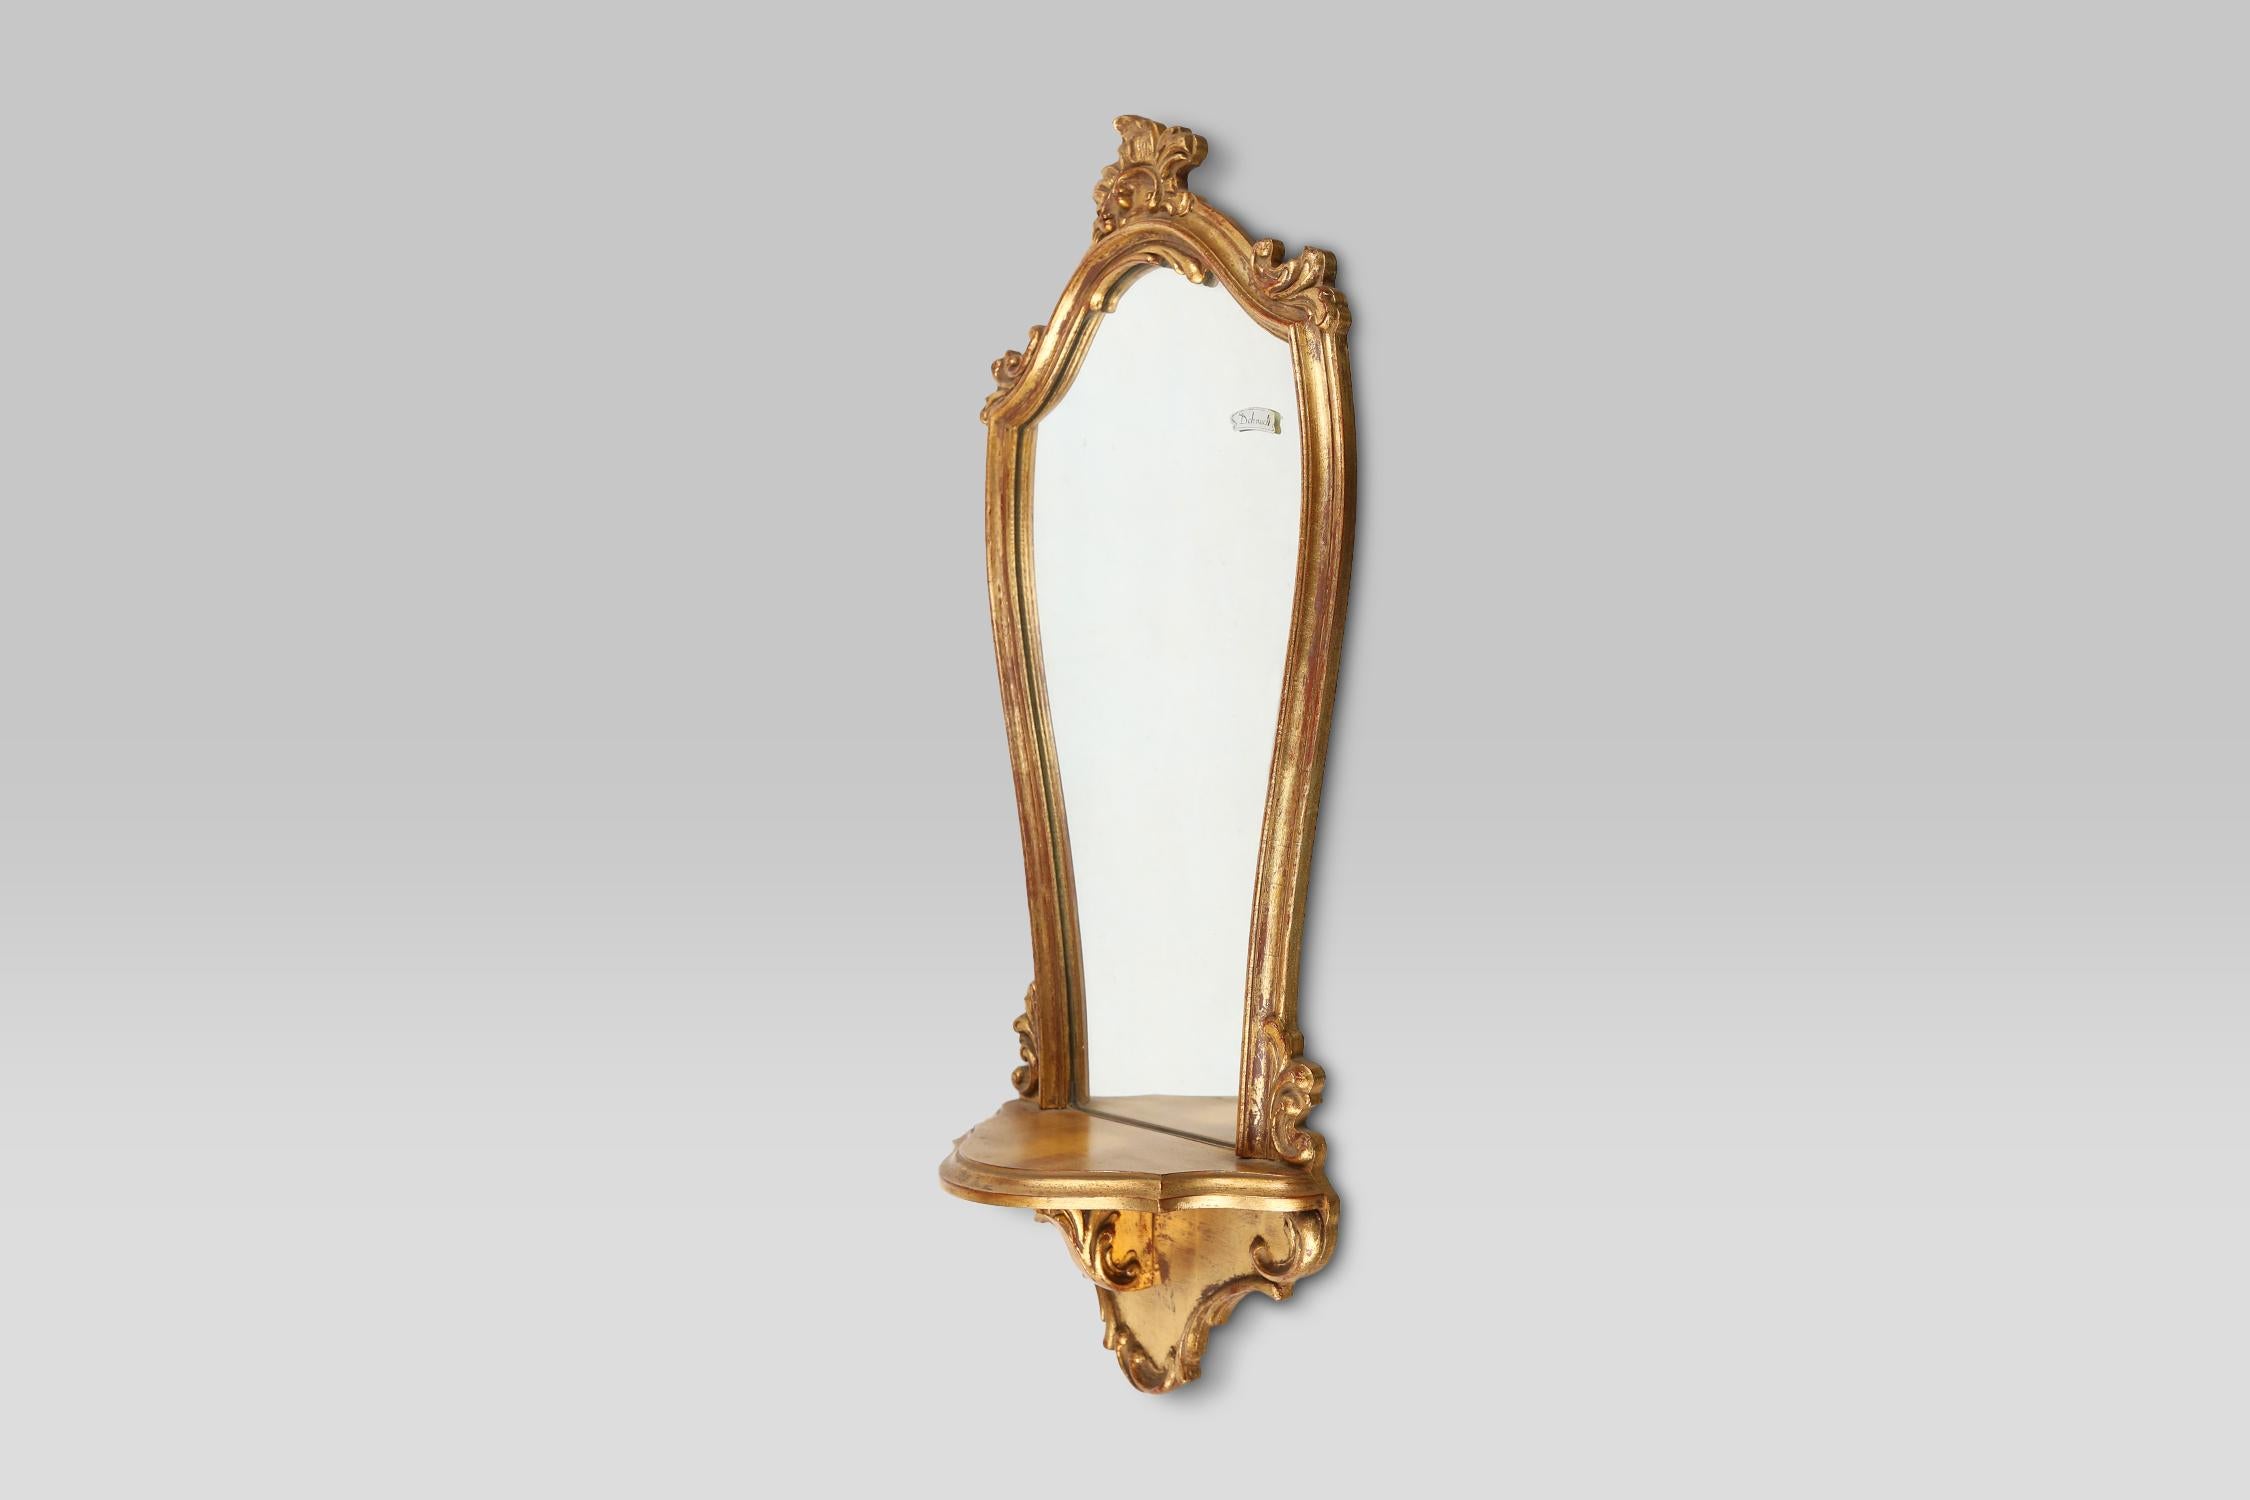 Belgium / 1970s / Deknudt / baroc style mirror / resin / gold / with small plateau

An exquisite gold framed mirror with small plateau in resin with original label from Deknudt Belgium. Highly decorative wall mirror with an aura of luxury that will